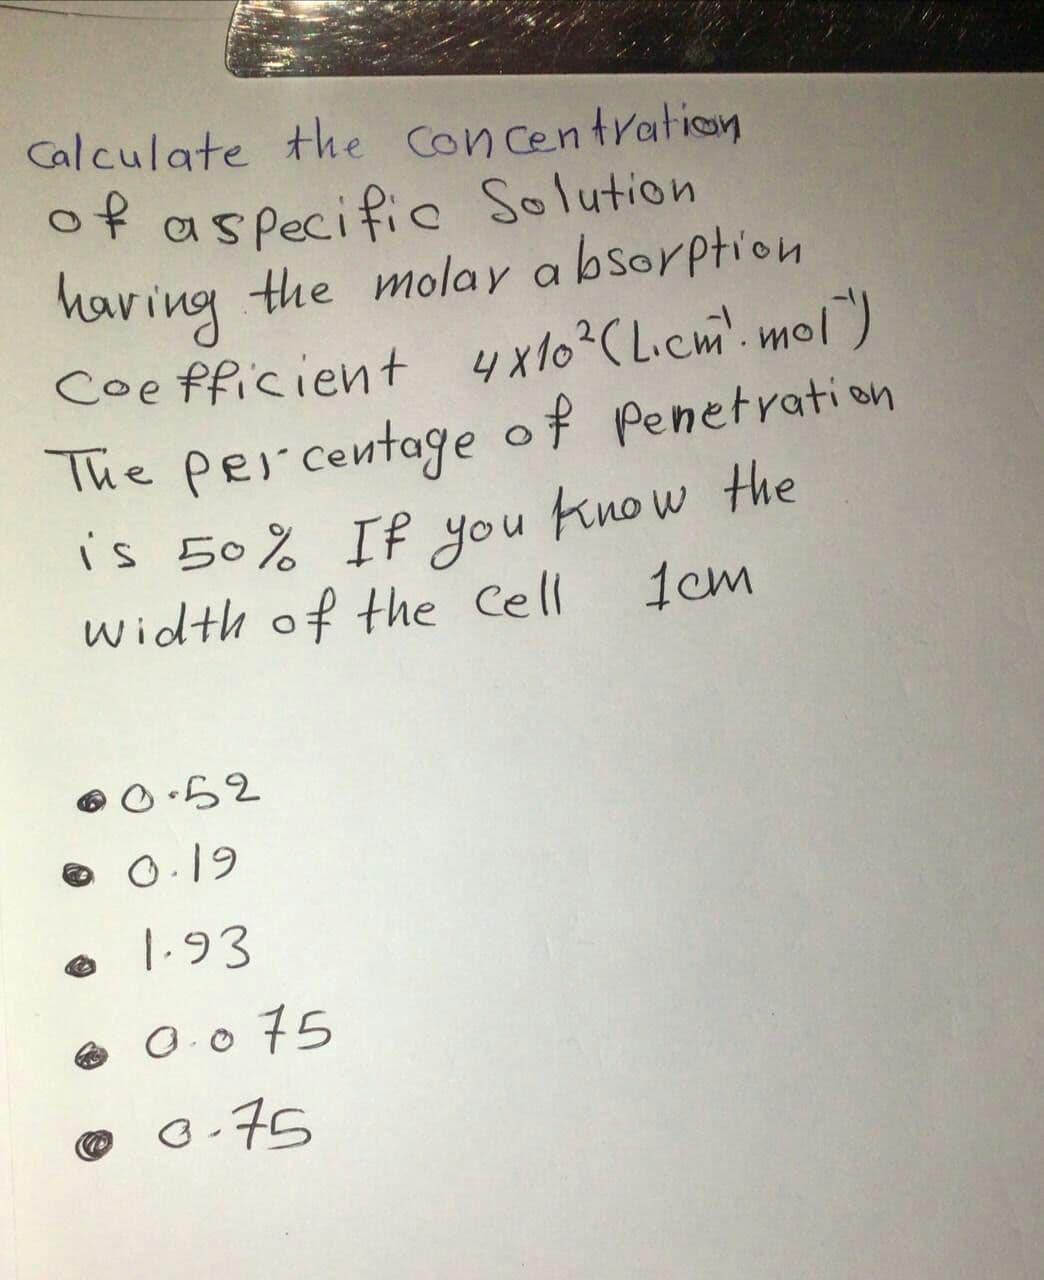 Calculate the Con centration
of aspecific Solution
the molay a bsorption
having
Coe fficient 4x10?C Licm. mol)
Penetrati on
The percentage of
is 50% If you know the
1cm
width of the Cell
e 0.19
1.93
e O.0 75
©
o.75
